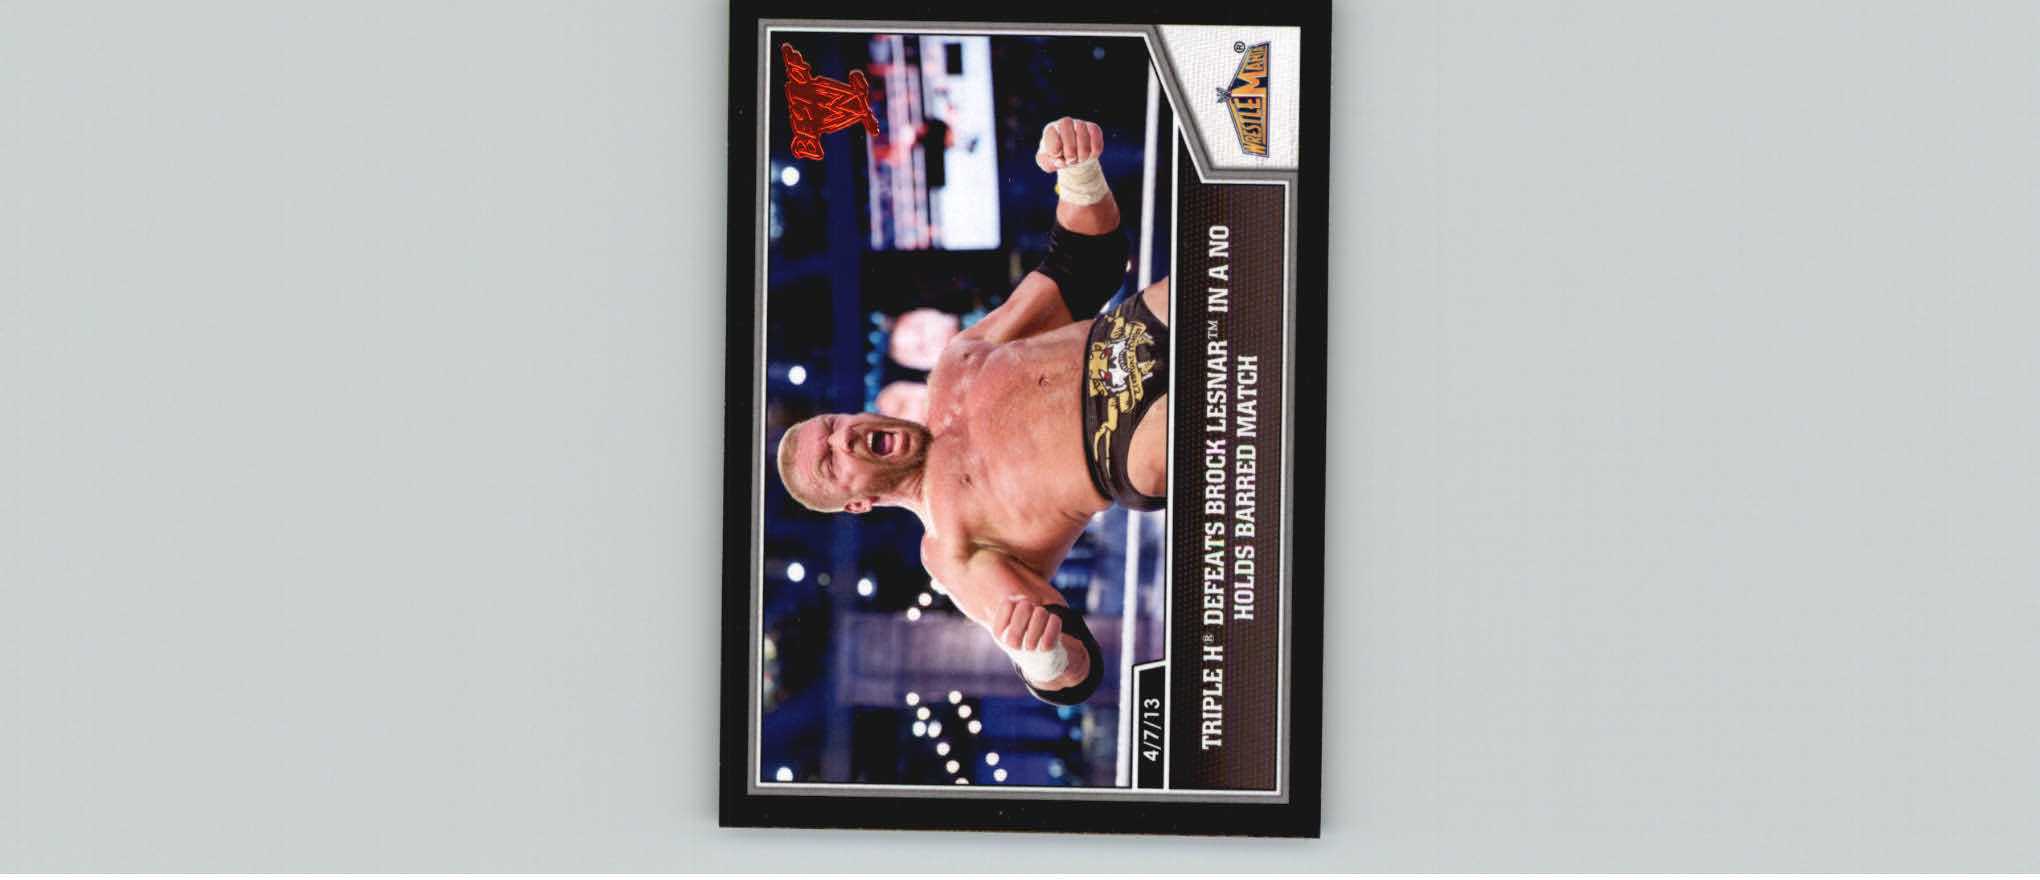 2013 Topps Best of WWE #109 Triple H Defeats Brock Lesnar in a No Holds Barred Match